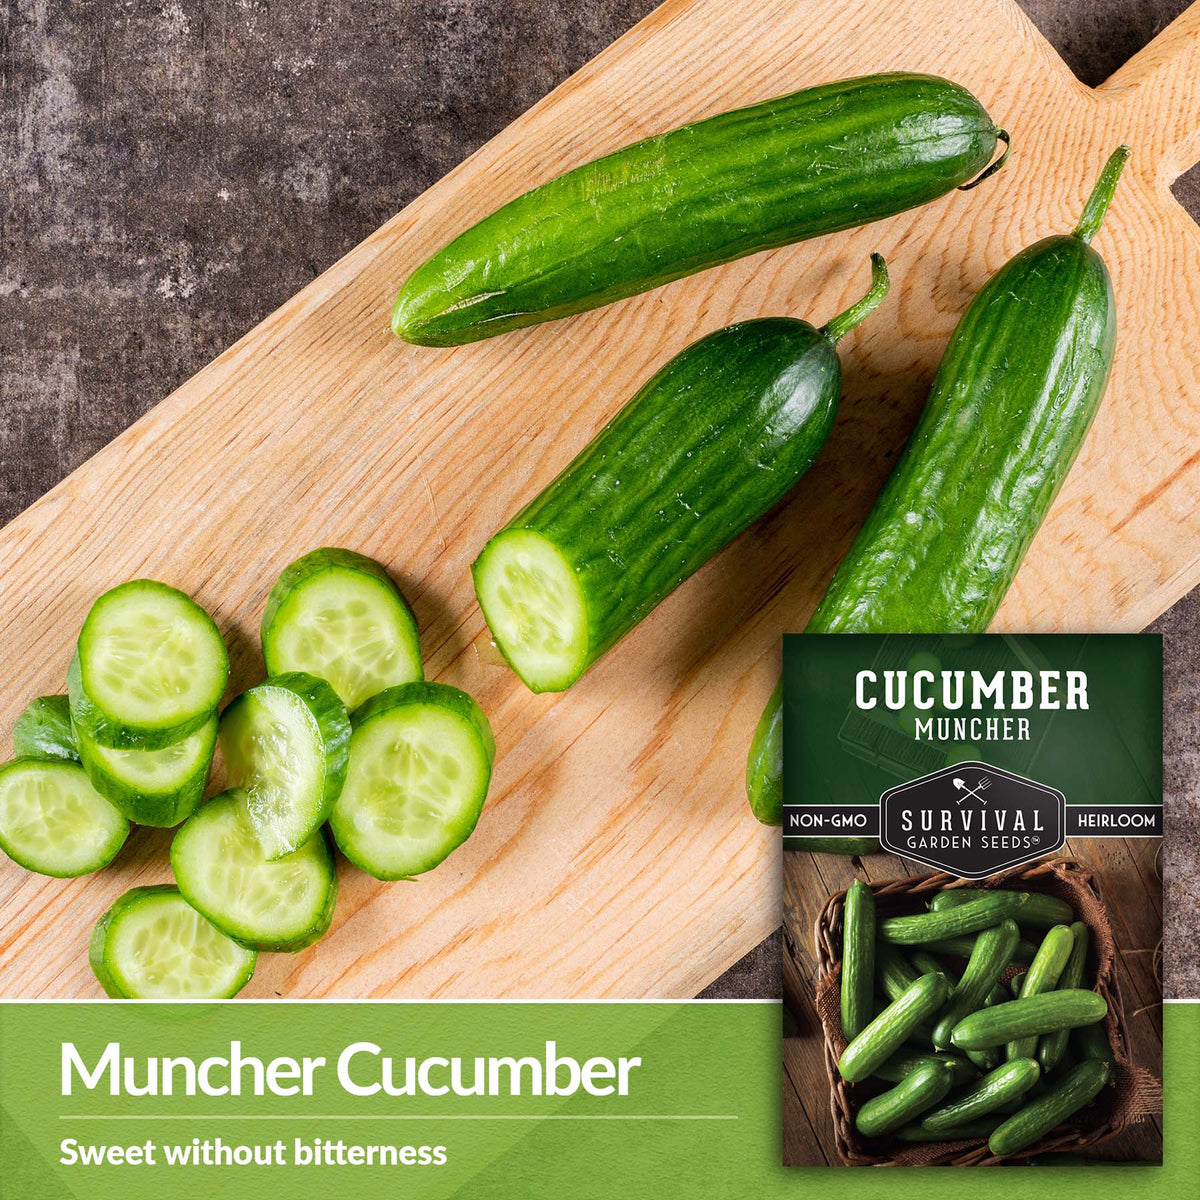 Muncher Cucumbers are sweet without bitterness